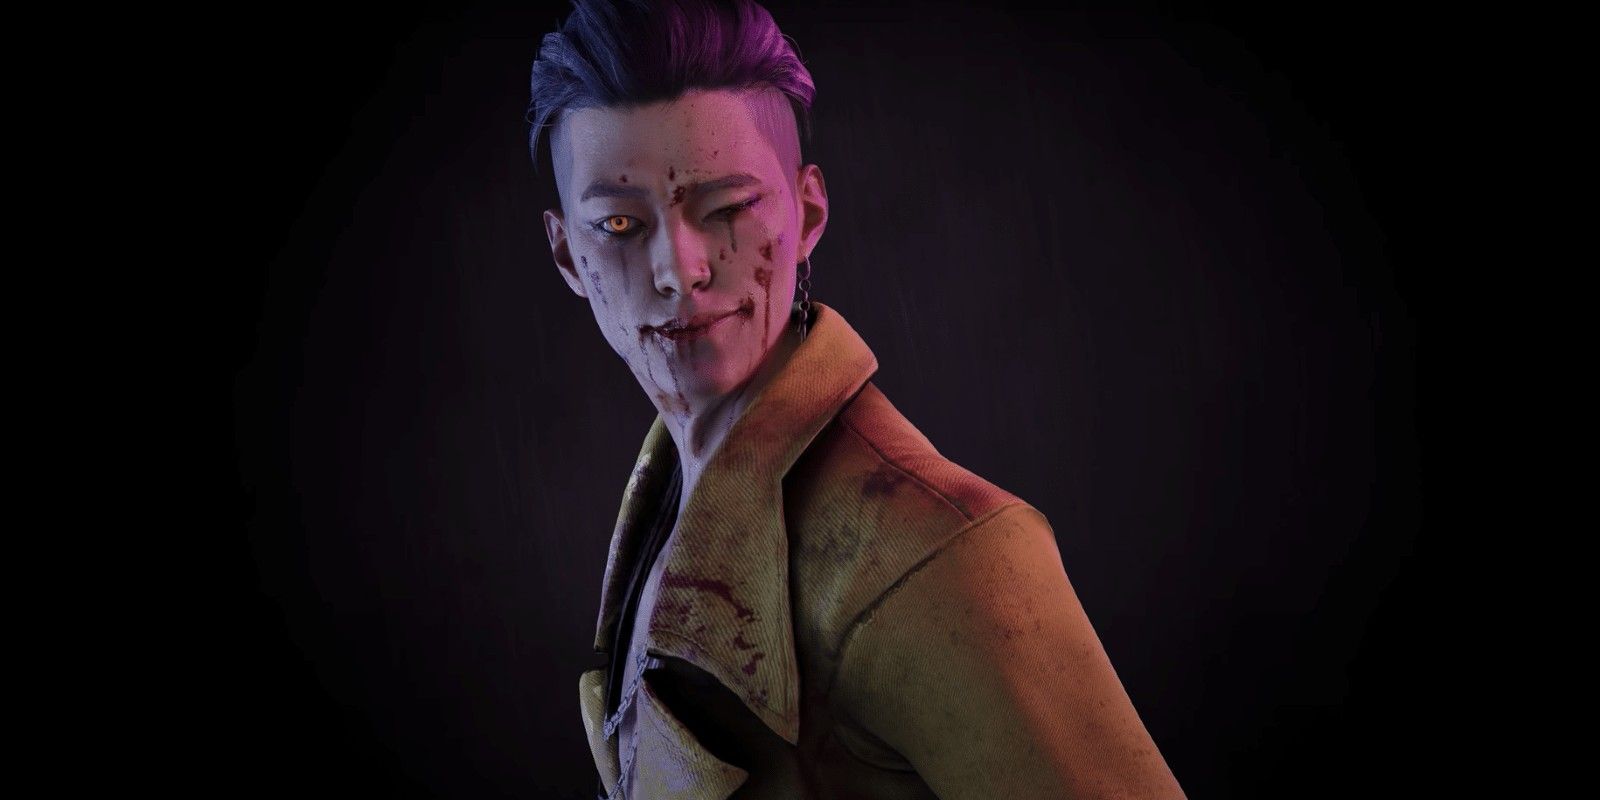 The Trickster in Dead By Daylight